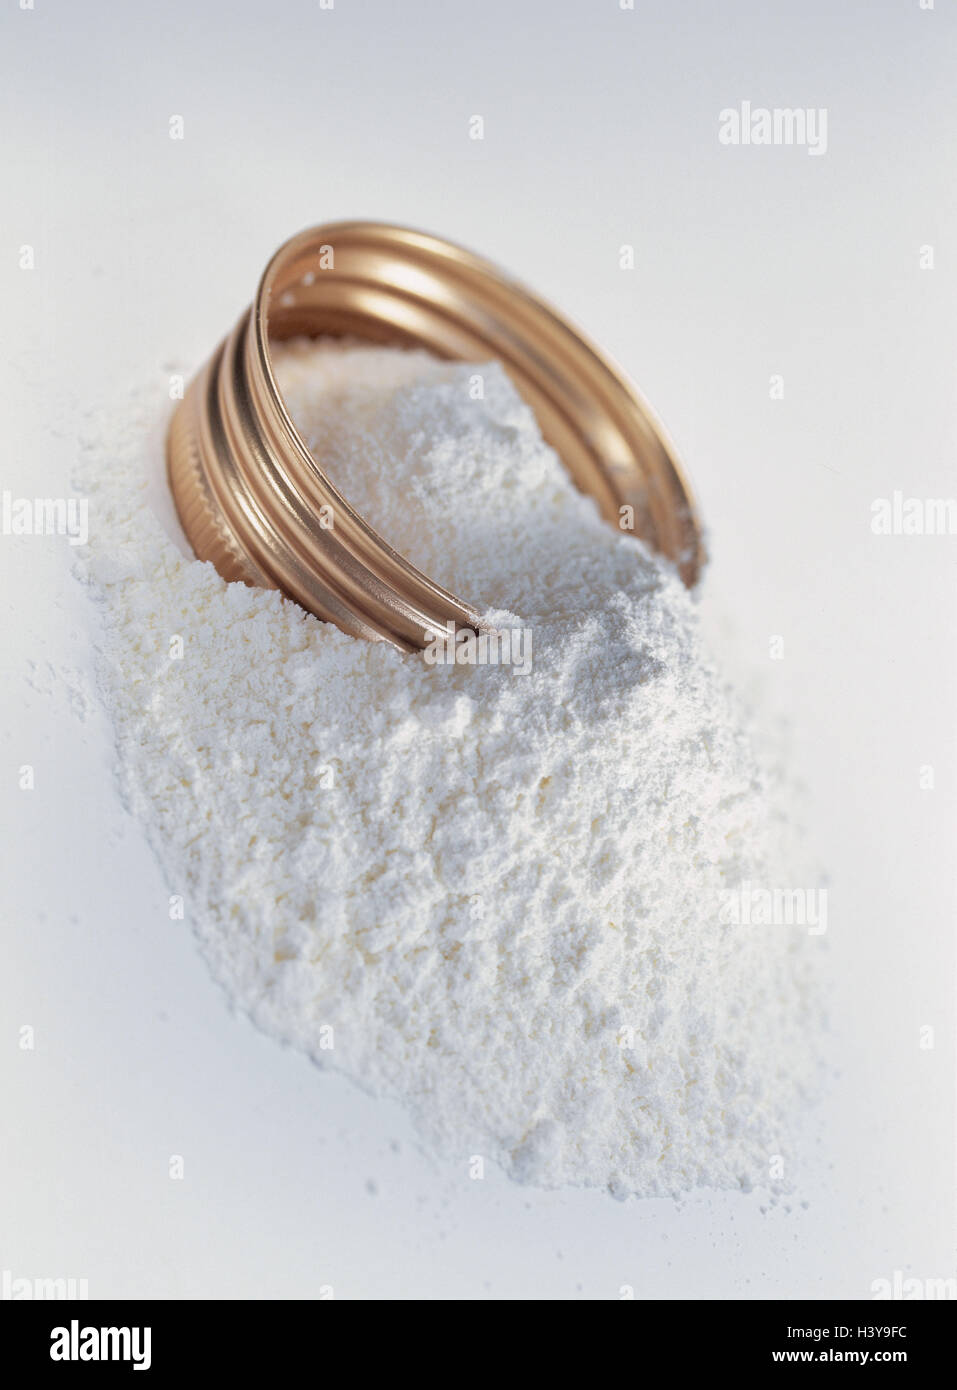 Cosmetics, screw top, talcum powder powder, powdery, talc powder, white, cosmetics, cosmetics articles, personal care, odour, shell care, care, care product, being in habit, lid, seal, screw cap, Still life, product photography, studio Stock Photo